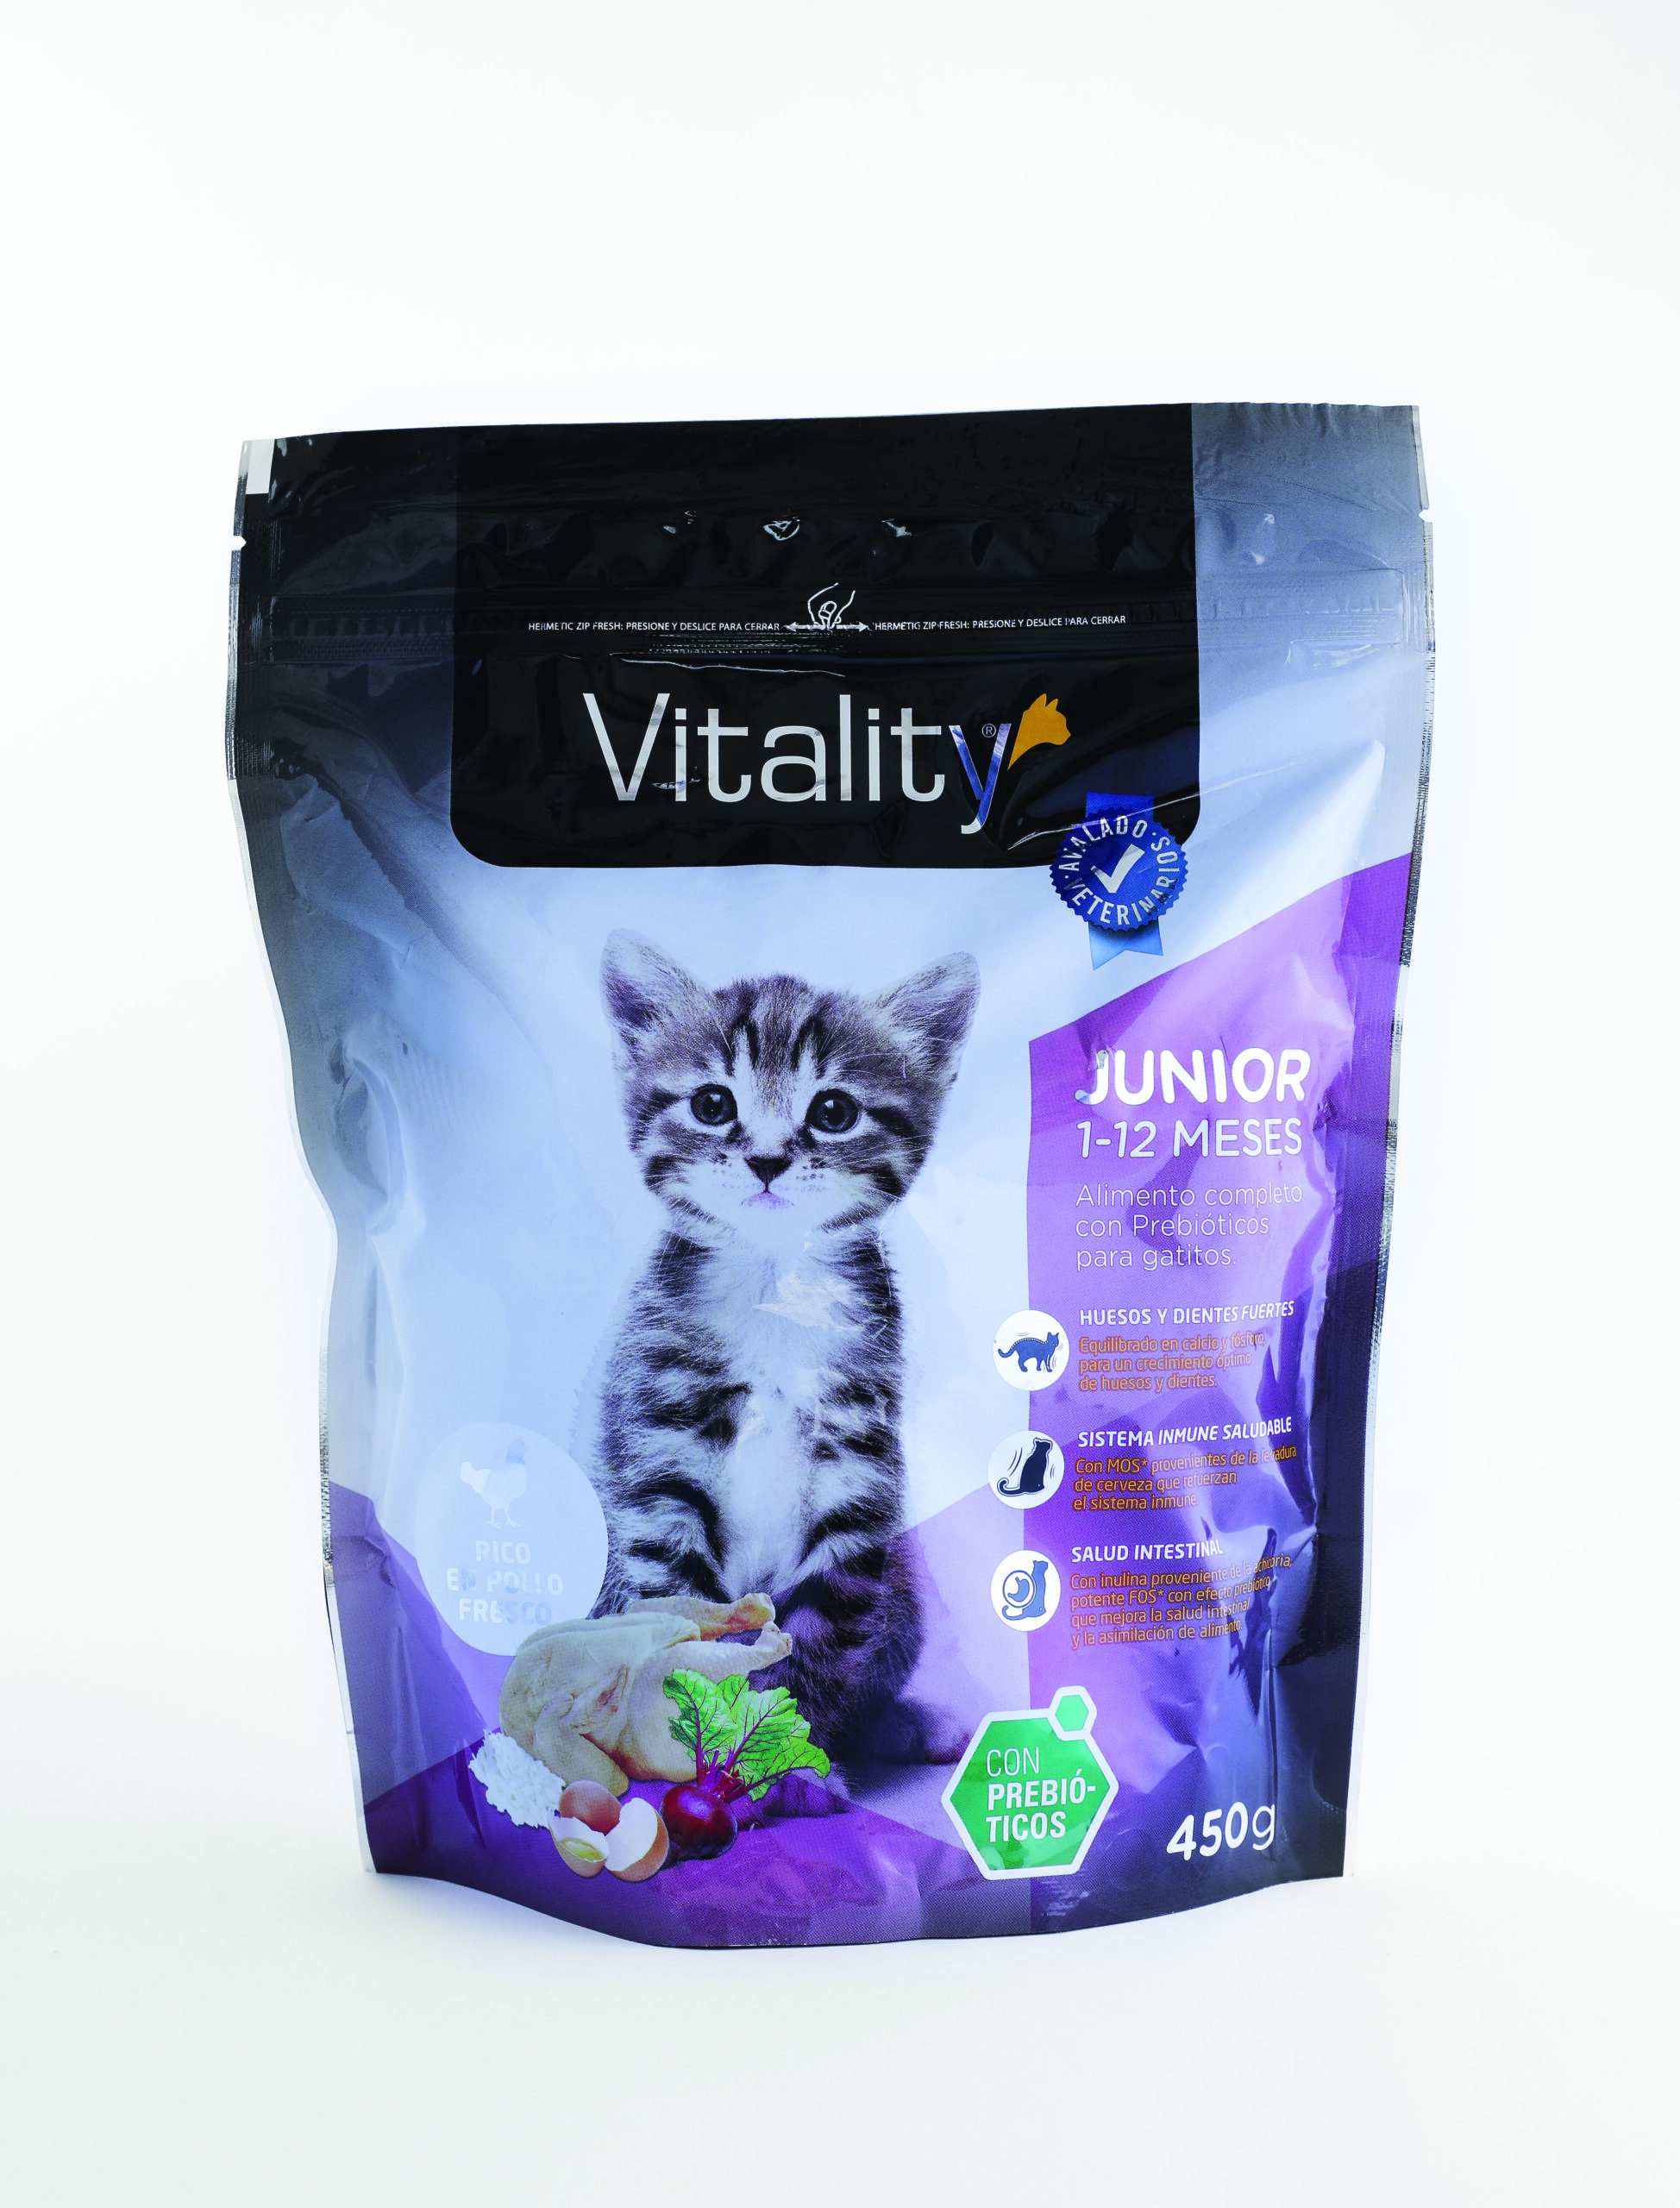 11a. Vitality, Croquettes for Junior cats with prebiotic